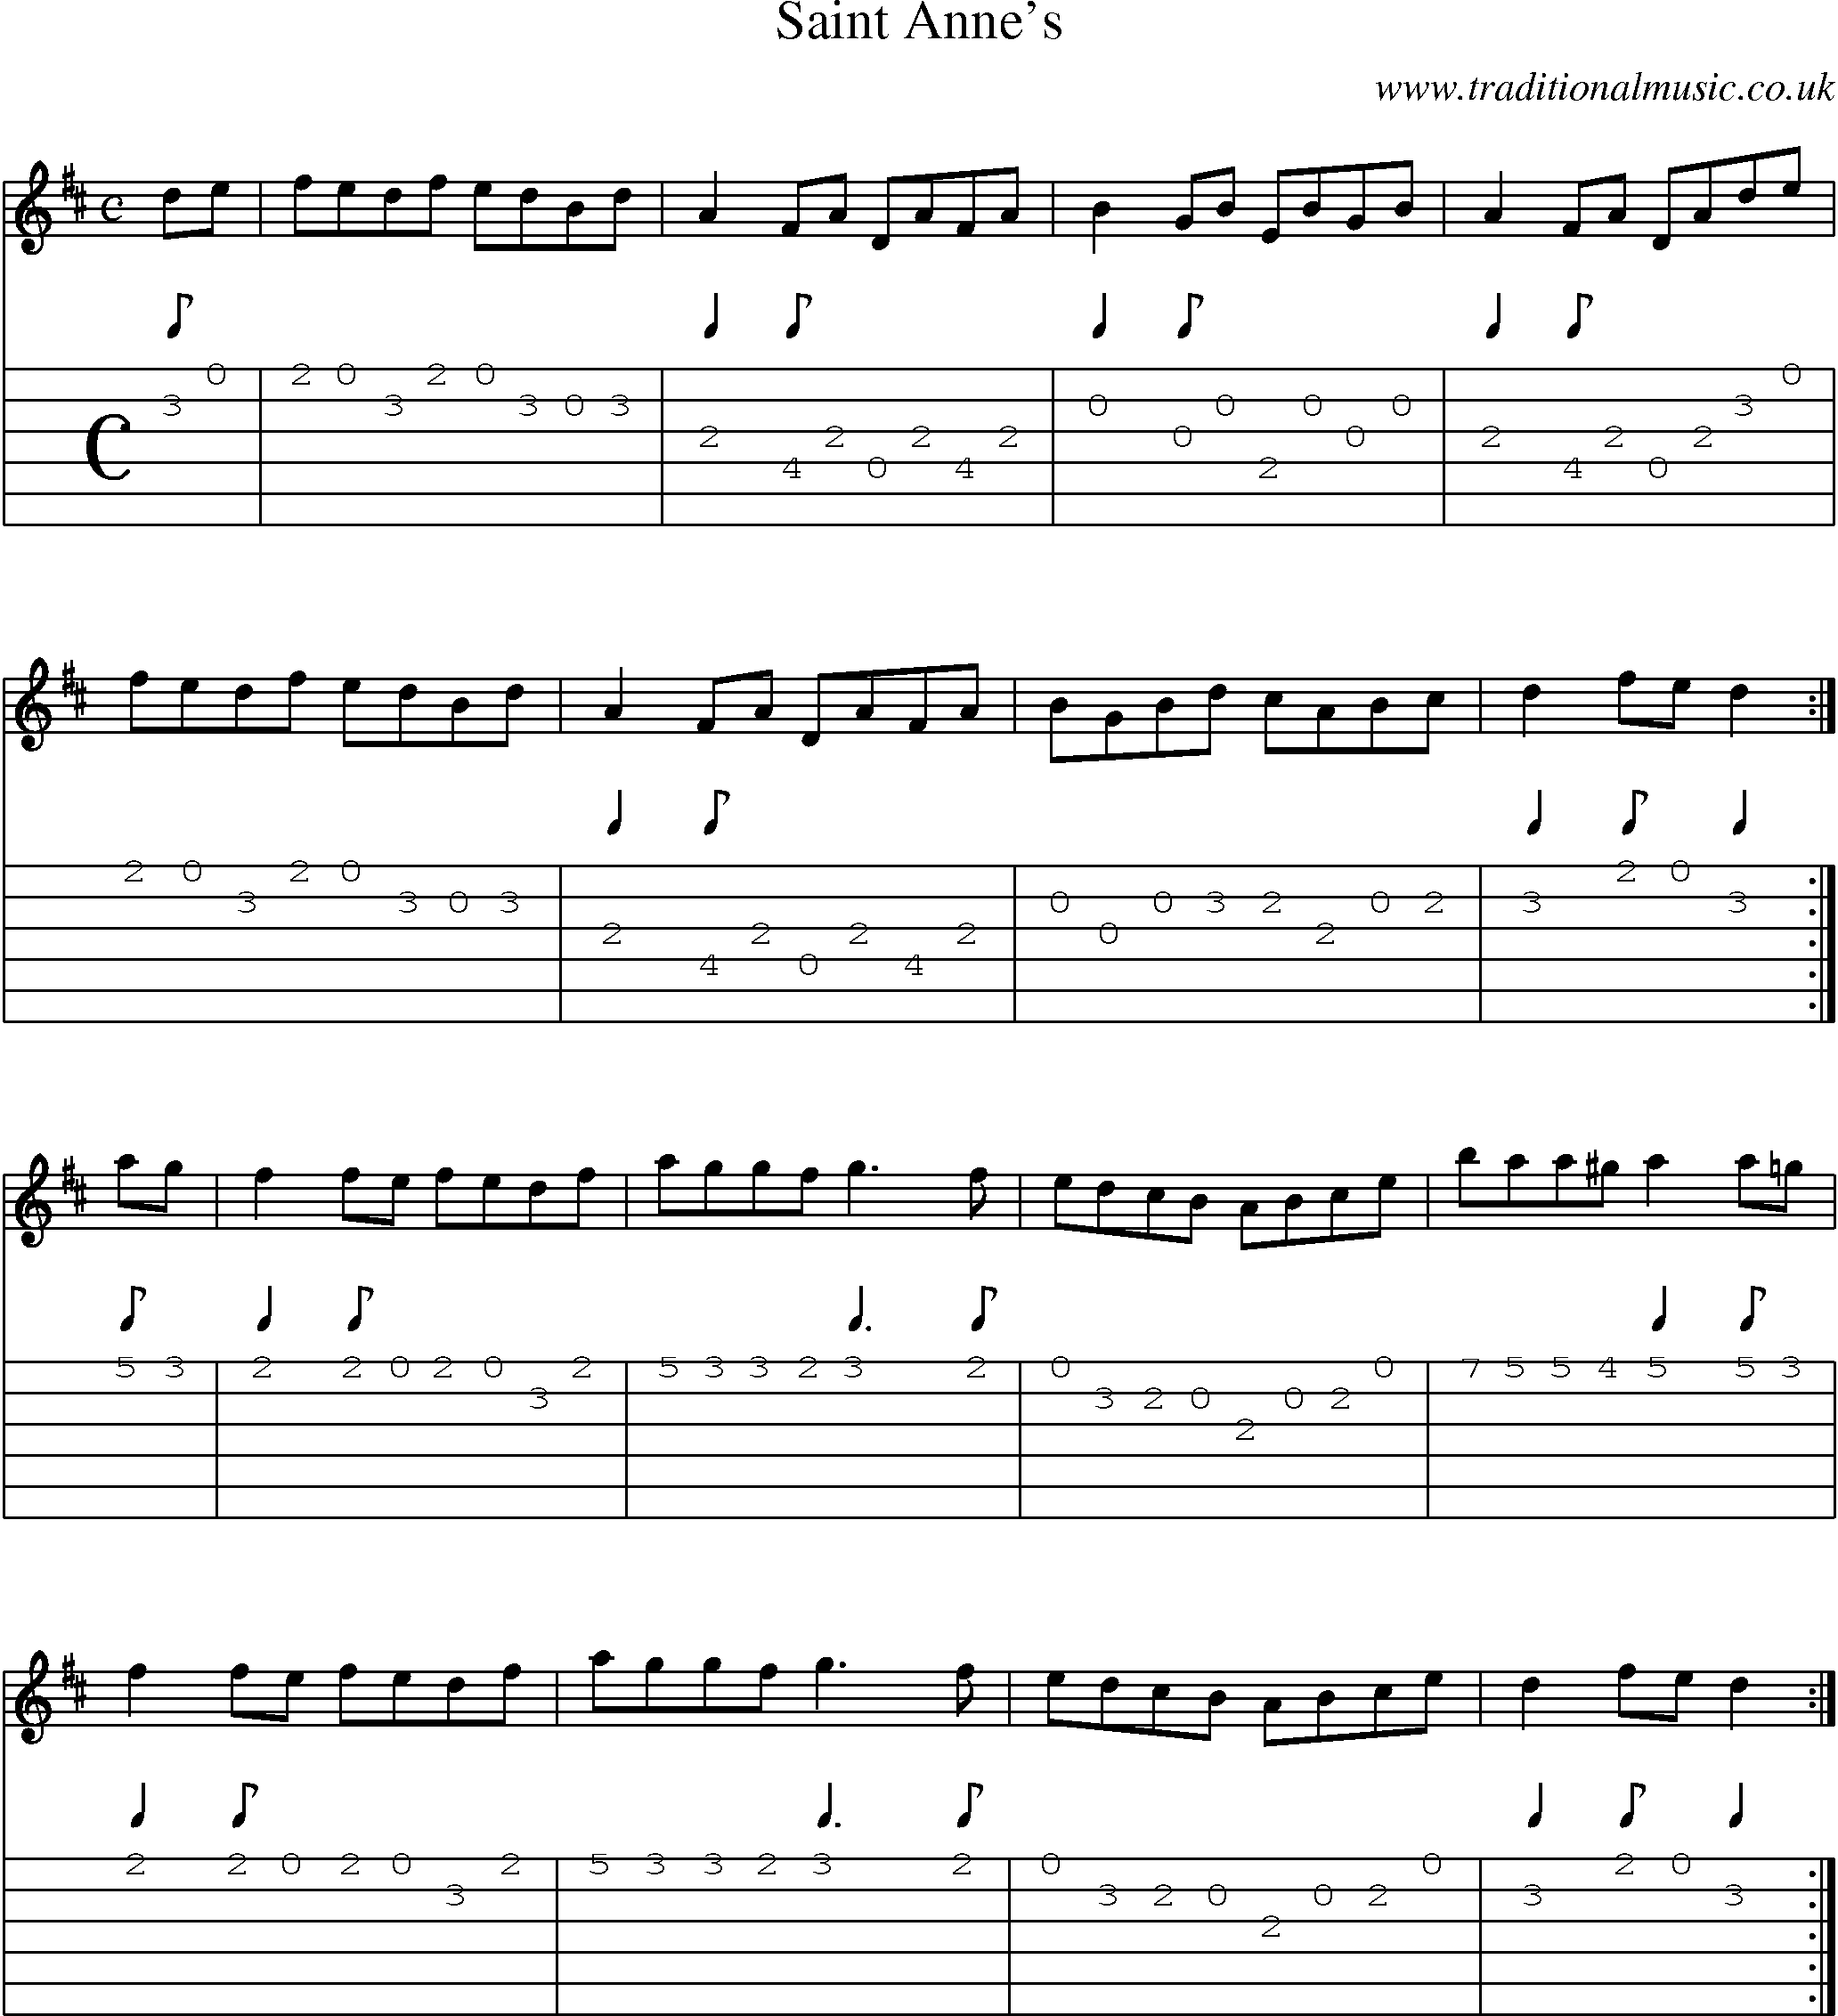 Music Score and Guitar Tabs for Saint Annes